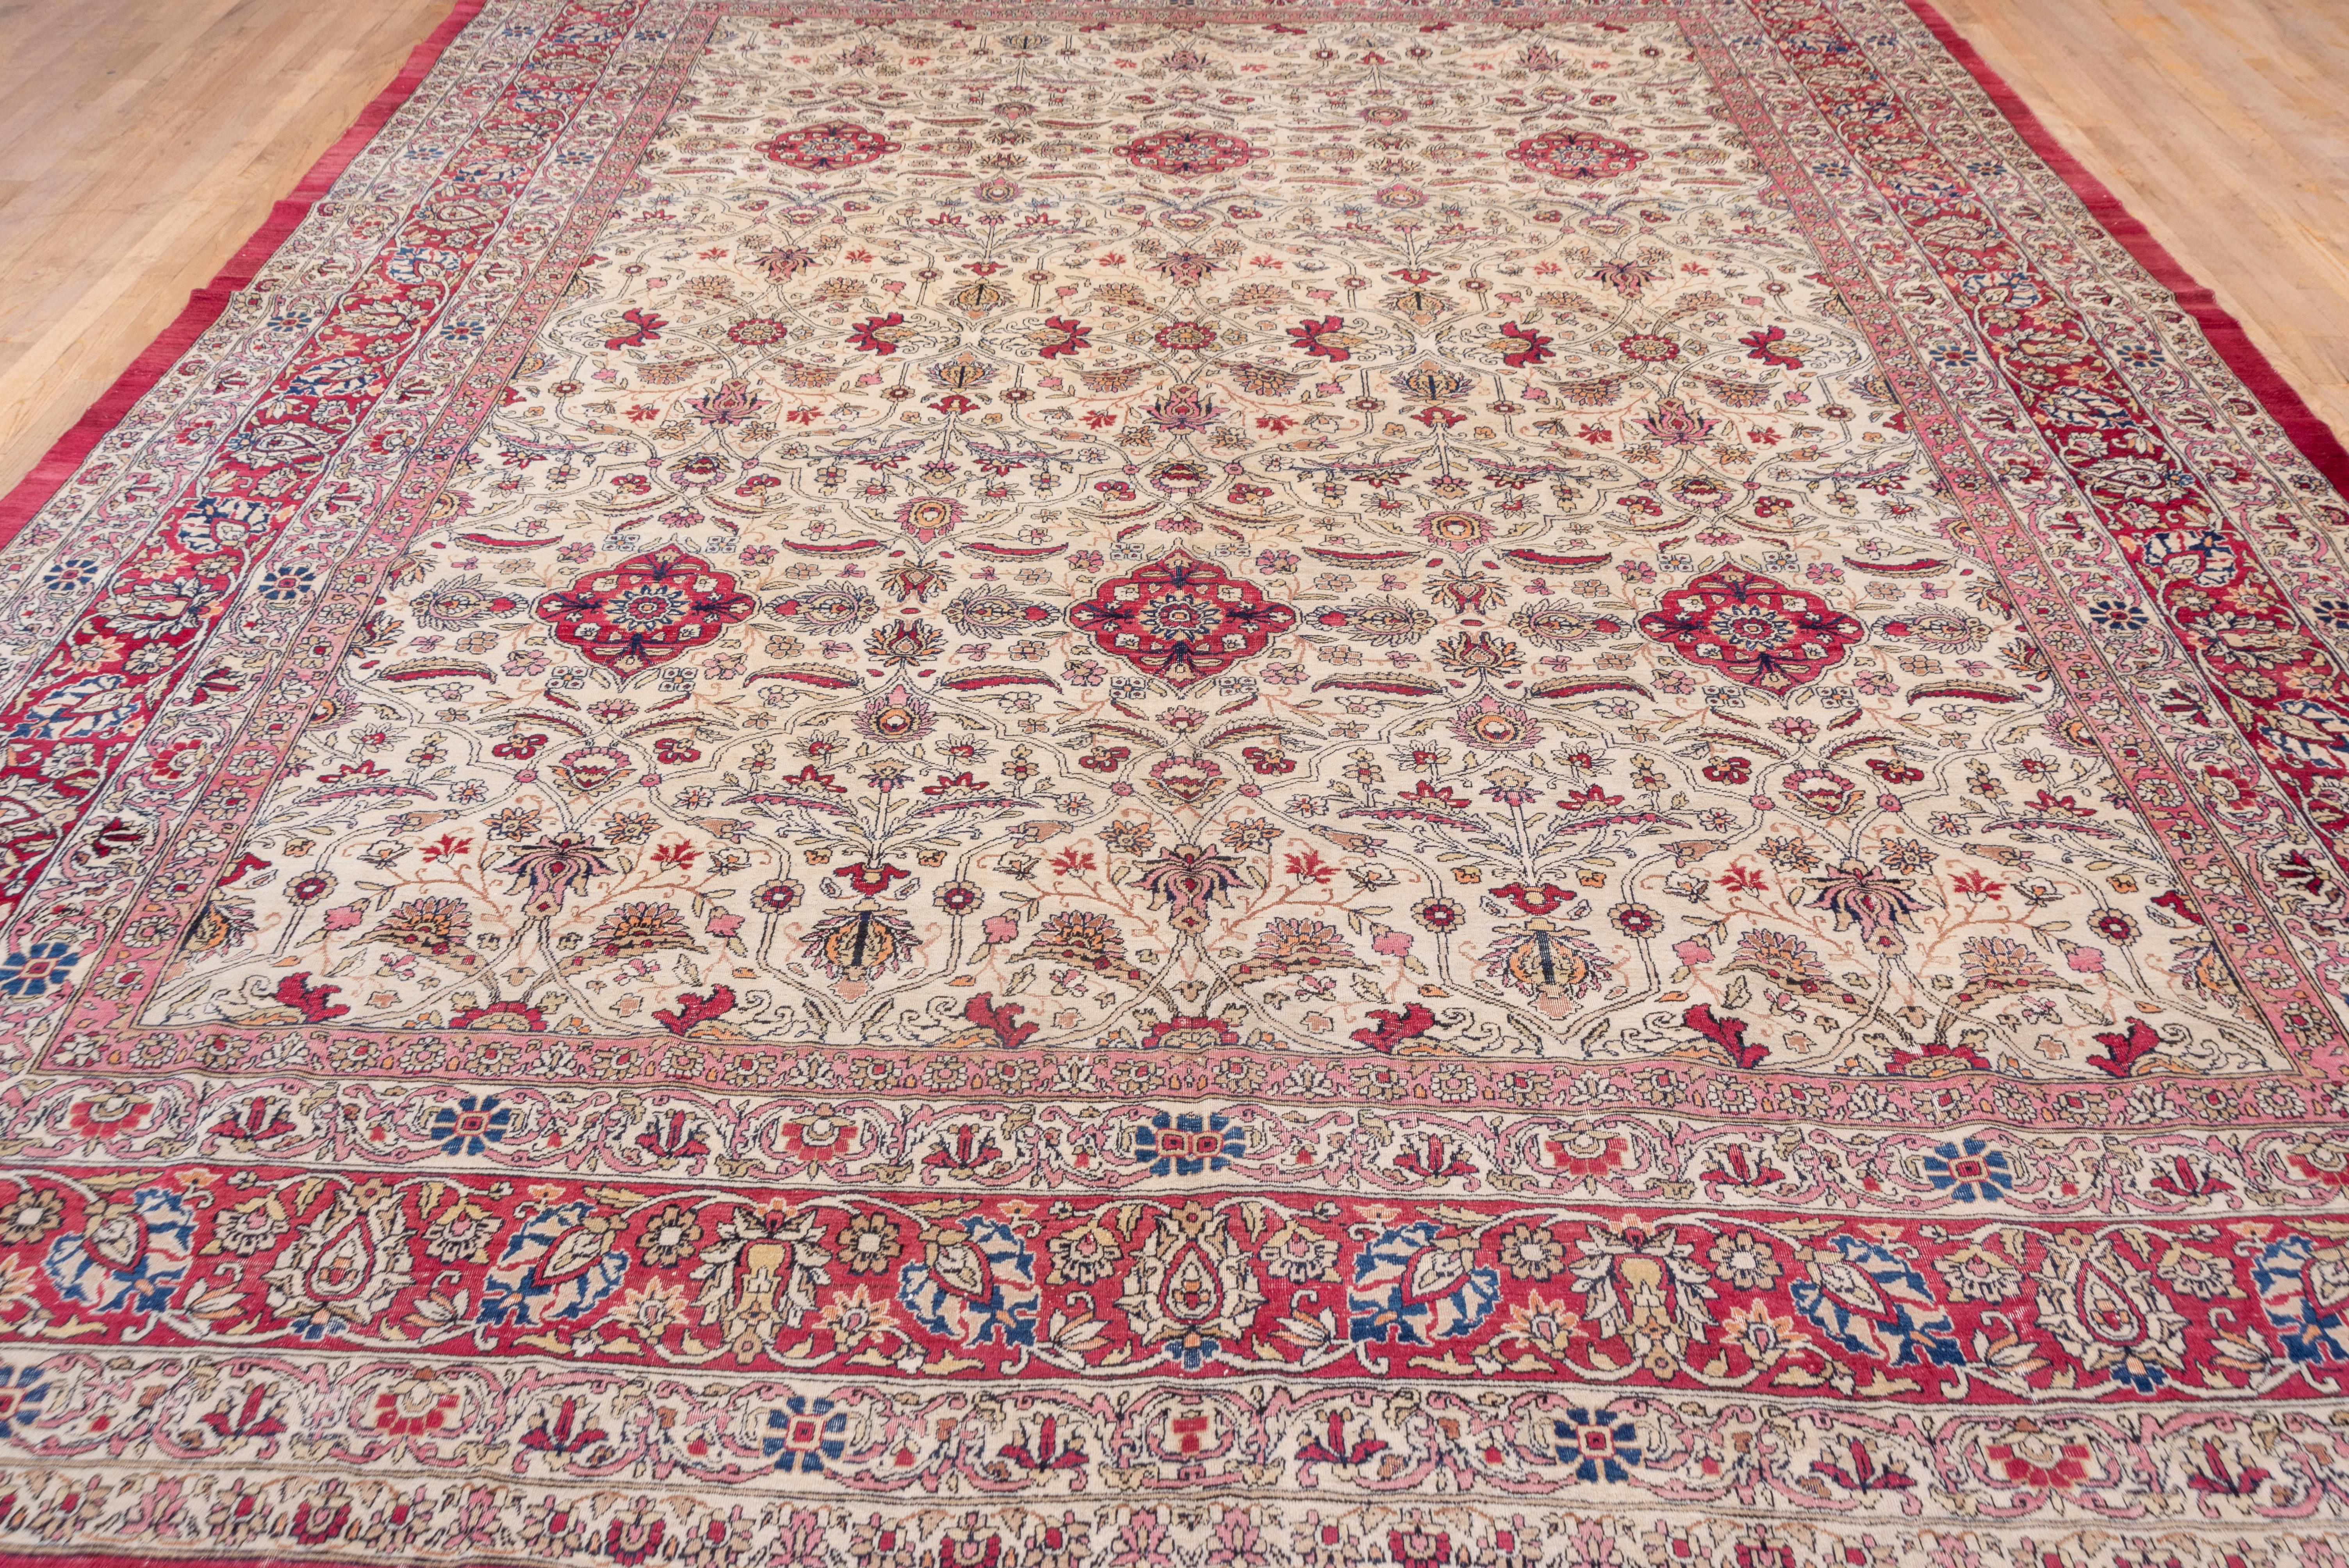 Hand-Knotted Antique Persian Lavar Kerman Carpet, Ecru All-Over Field, Red Pink Borders For Sale